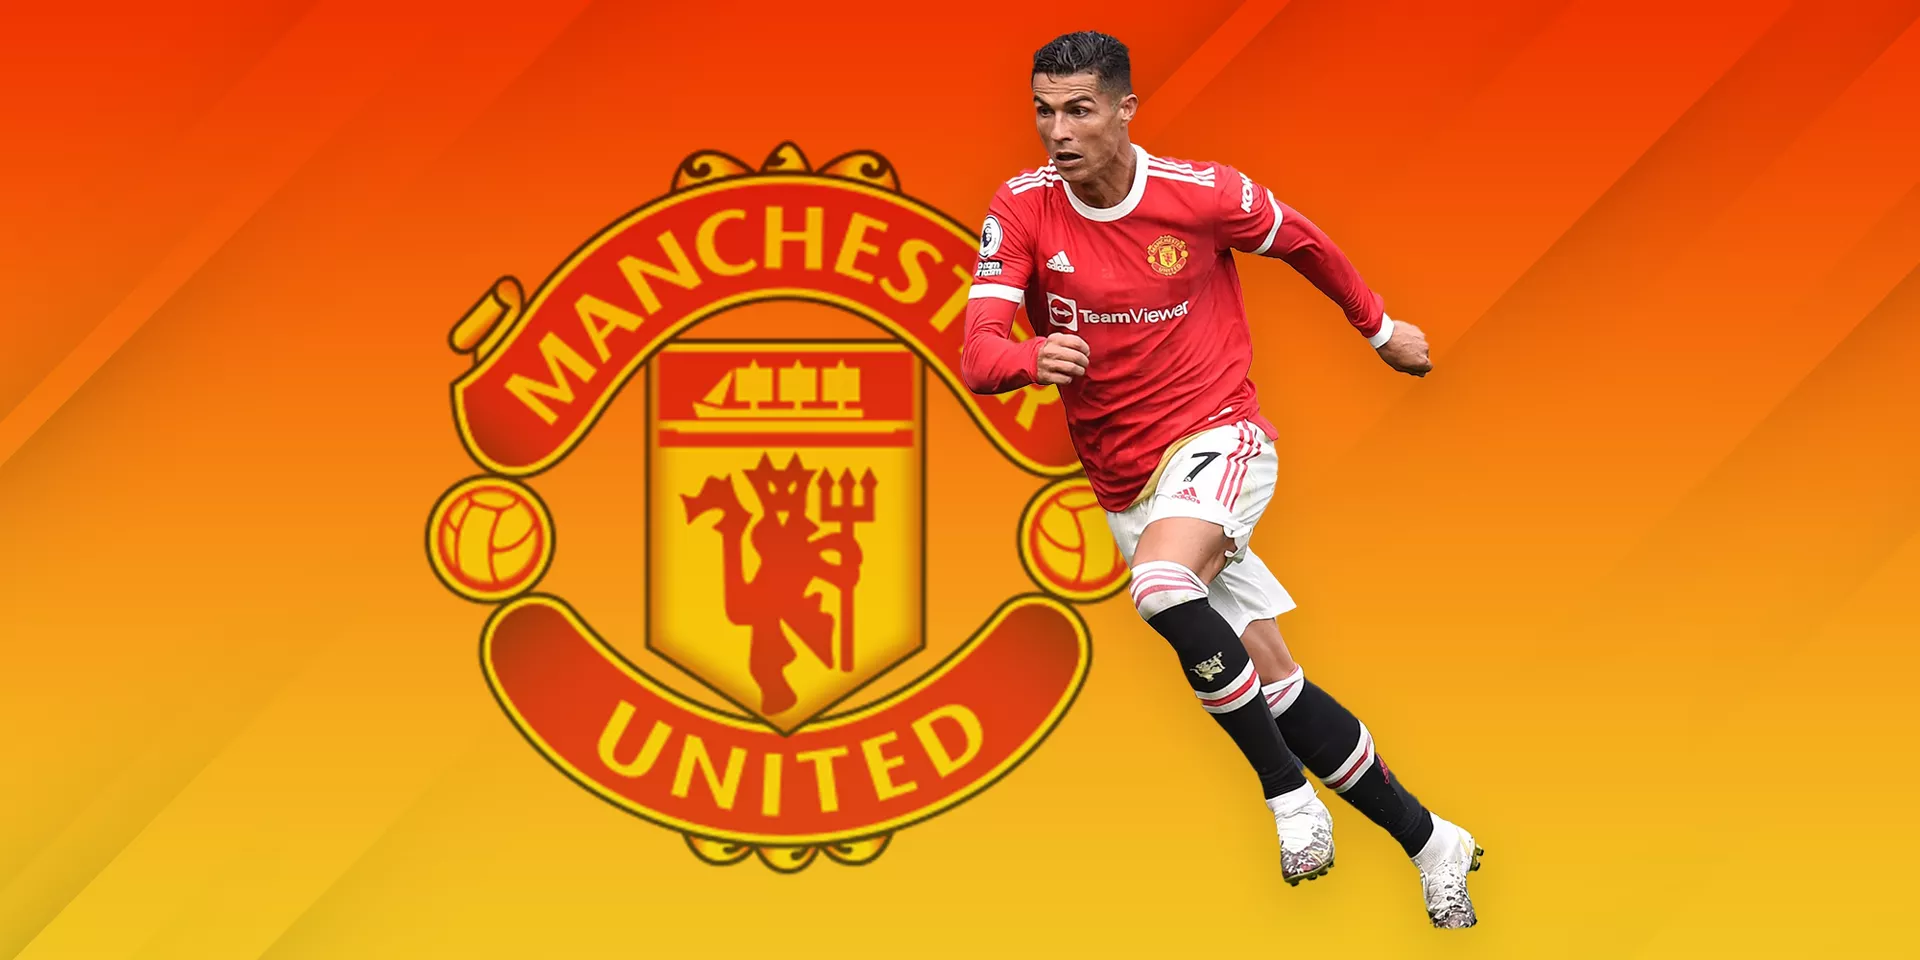 Why did Ronaldo move to Manchester United? Is it great for fans? - Quora